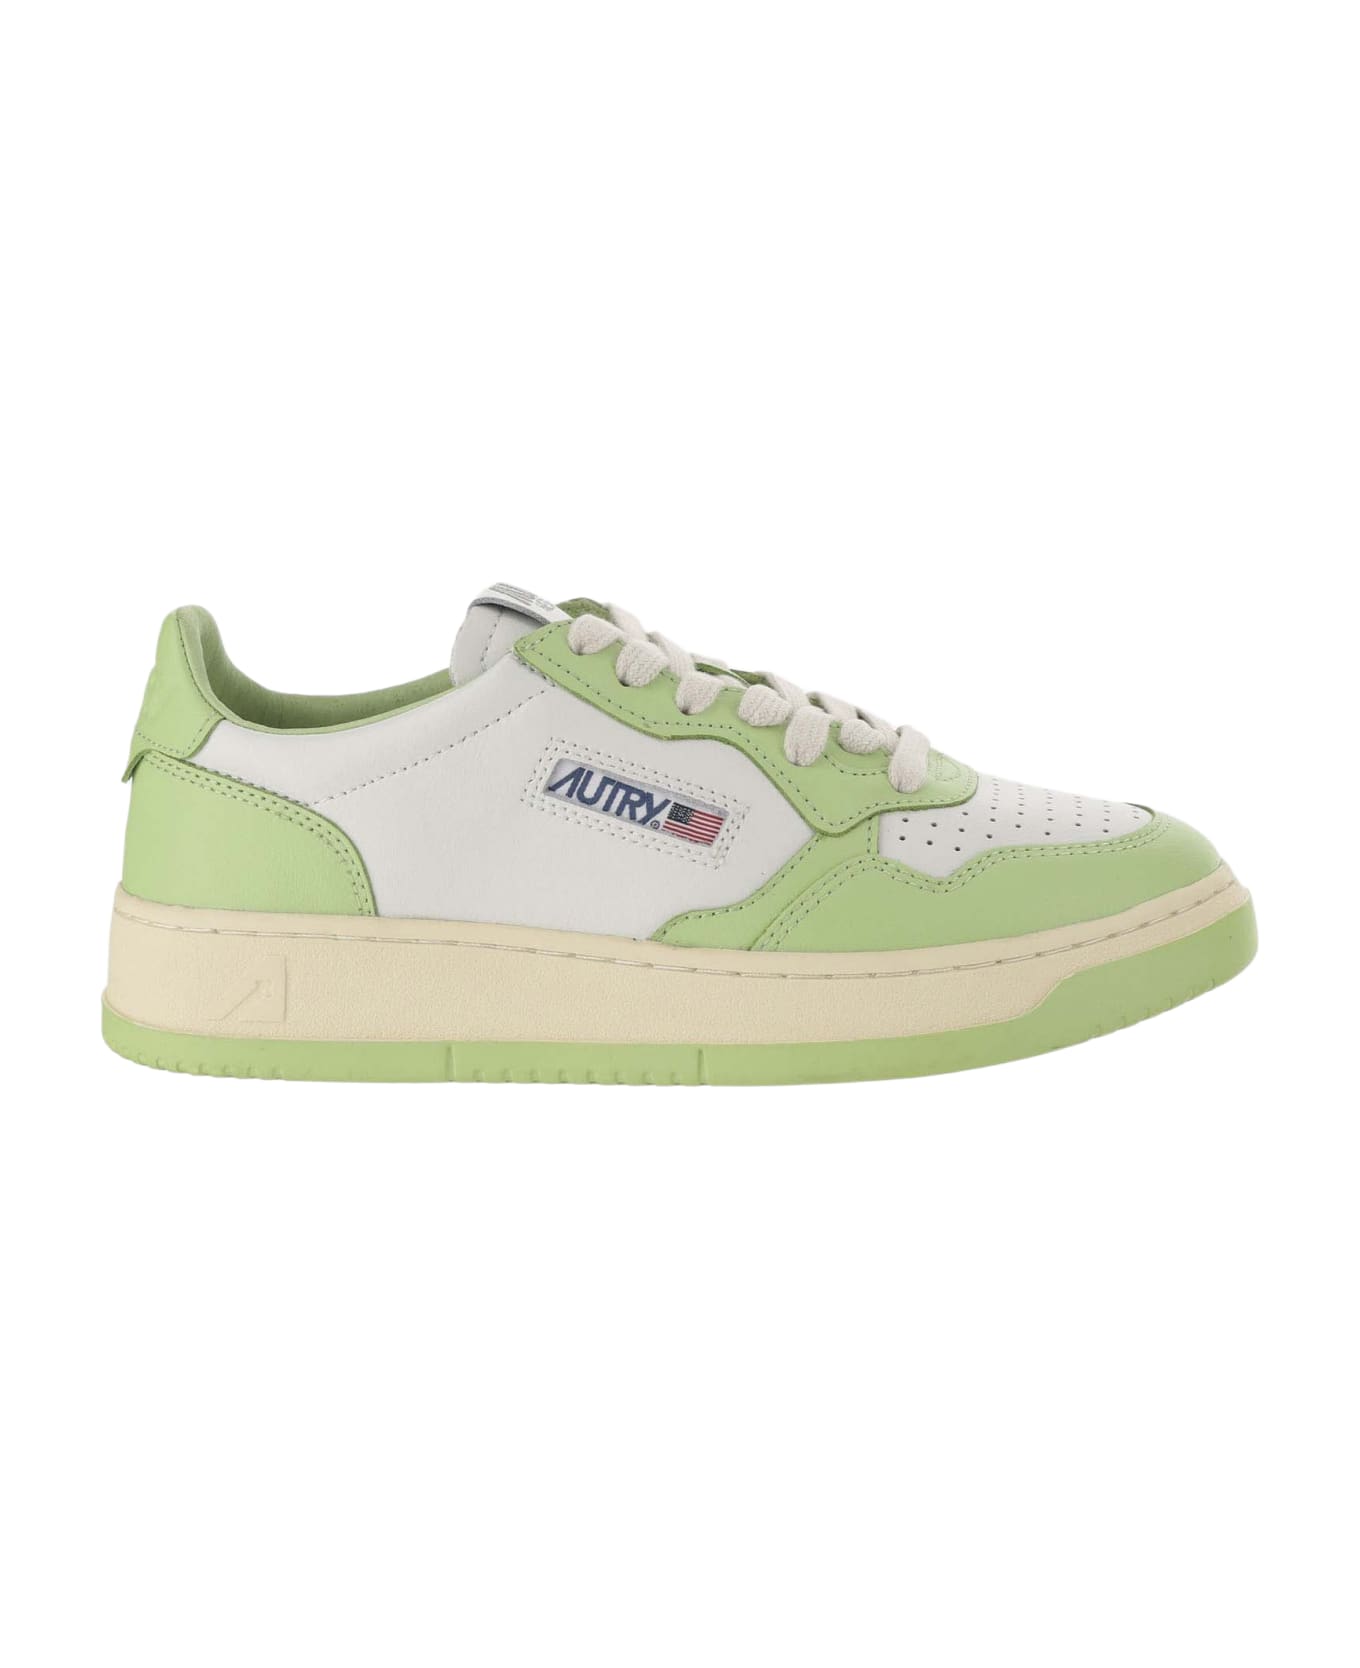 Autry Low Medalist Leather tallas - WHT/SNAP GRN